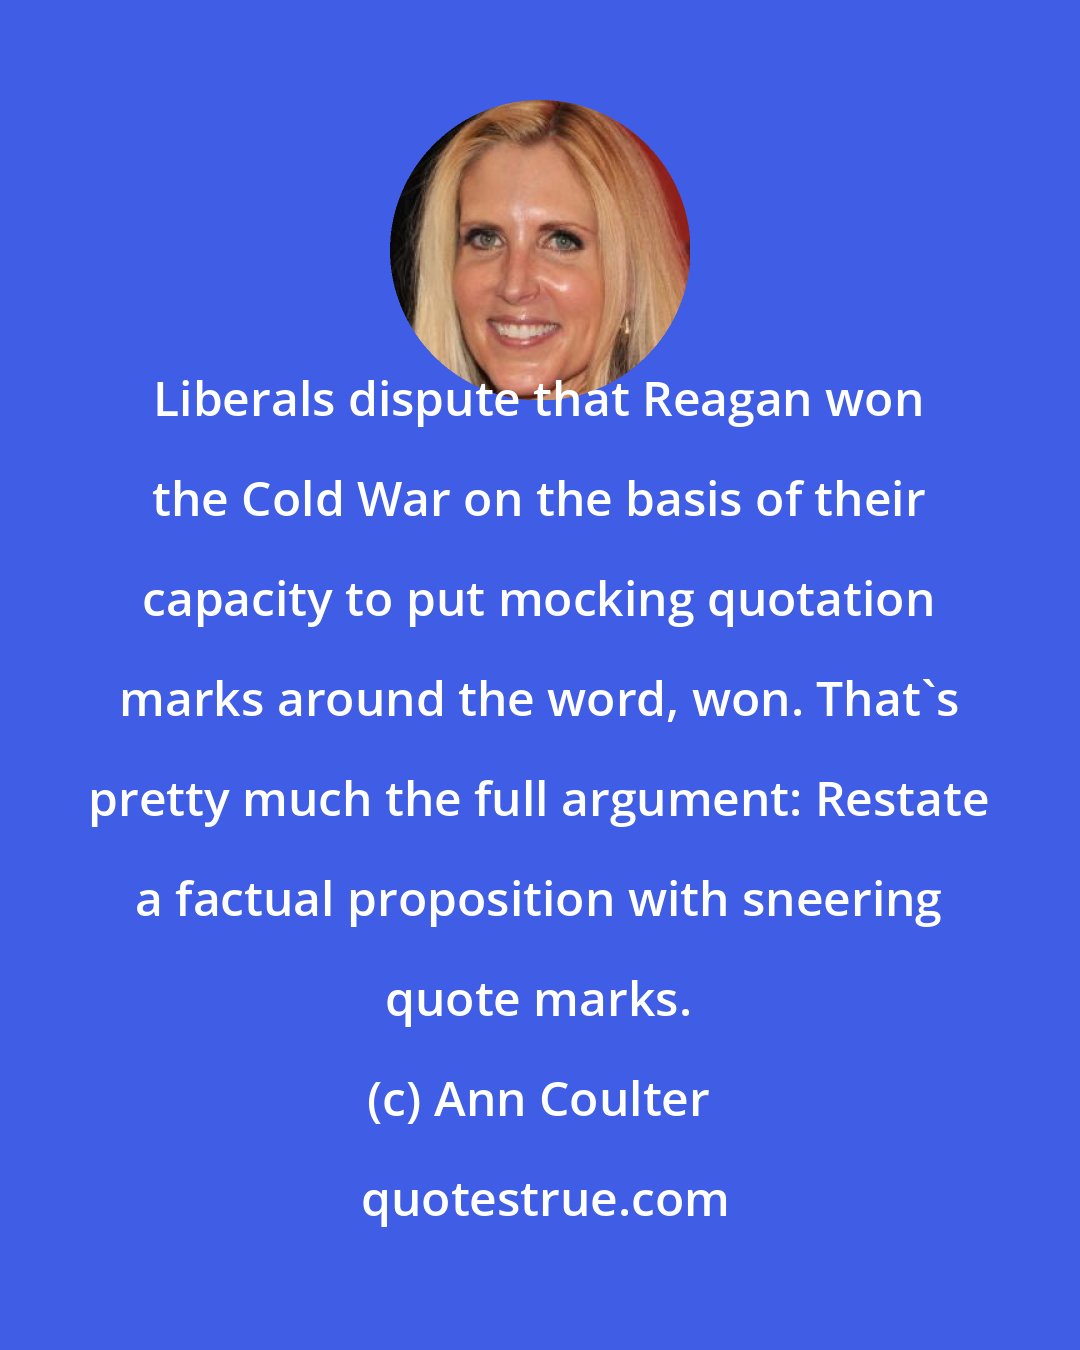 Ann Coulter: Liberals dispute that Reagan won the Cold War on the basis of their capacity to put mocking quotation marks around the word, won. That's pretty much the full argument: Restate a factual proposition with sneering quote marks.